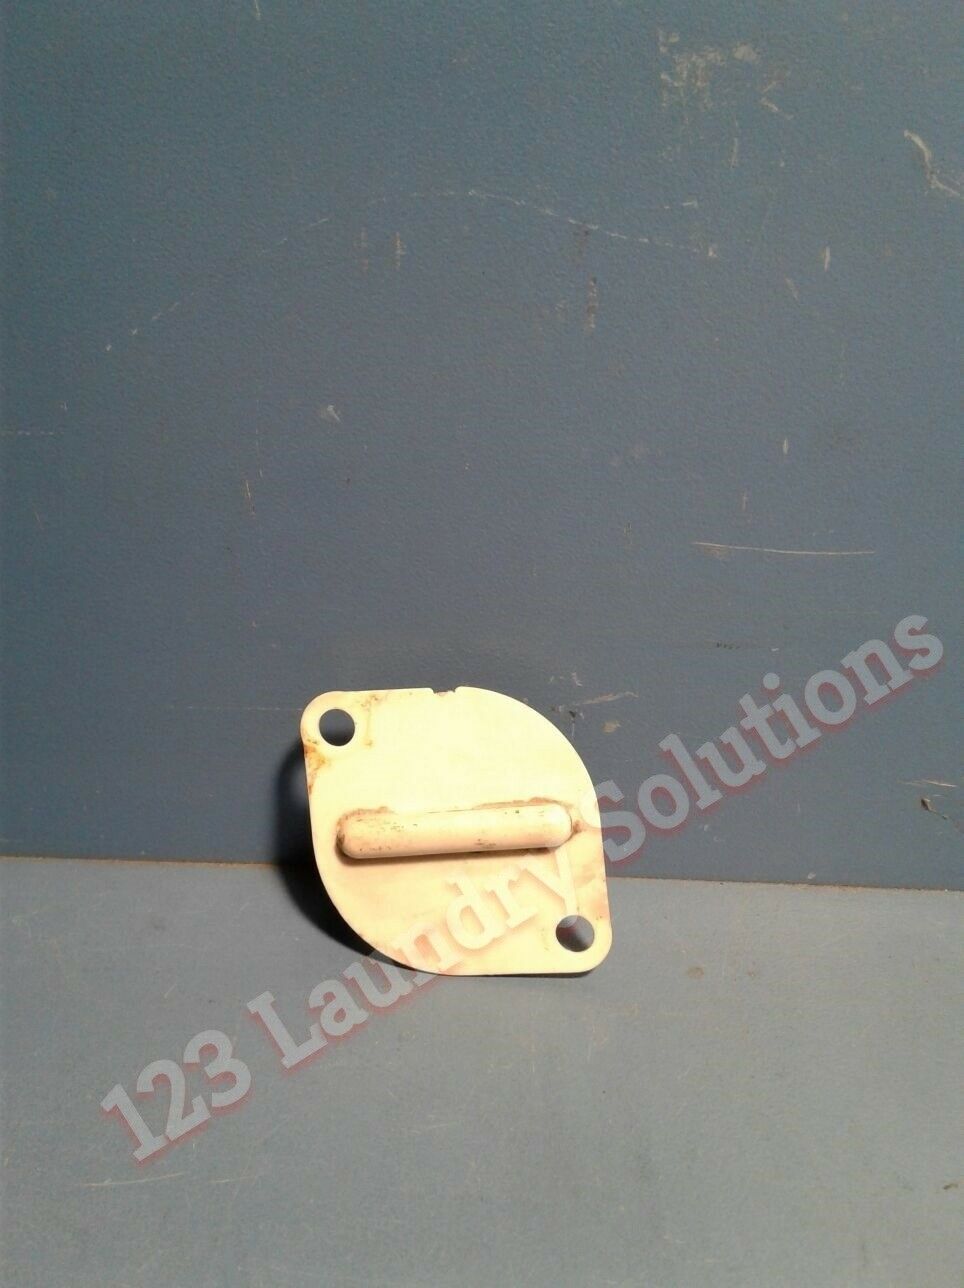 Maytag Clothes Dryer Thermostat Thermal Fuse 306604 Used - $6.44